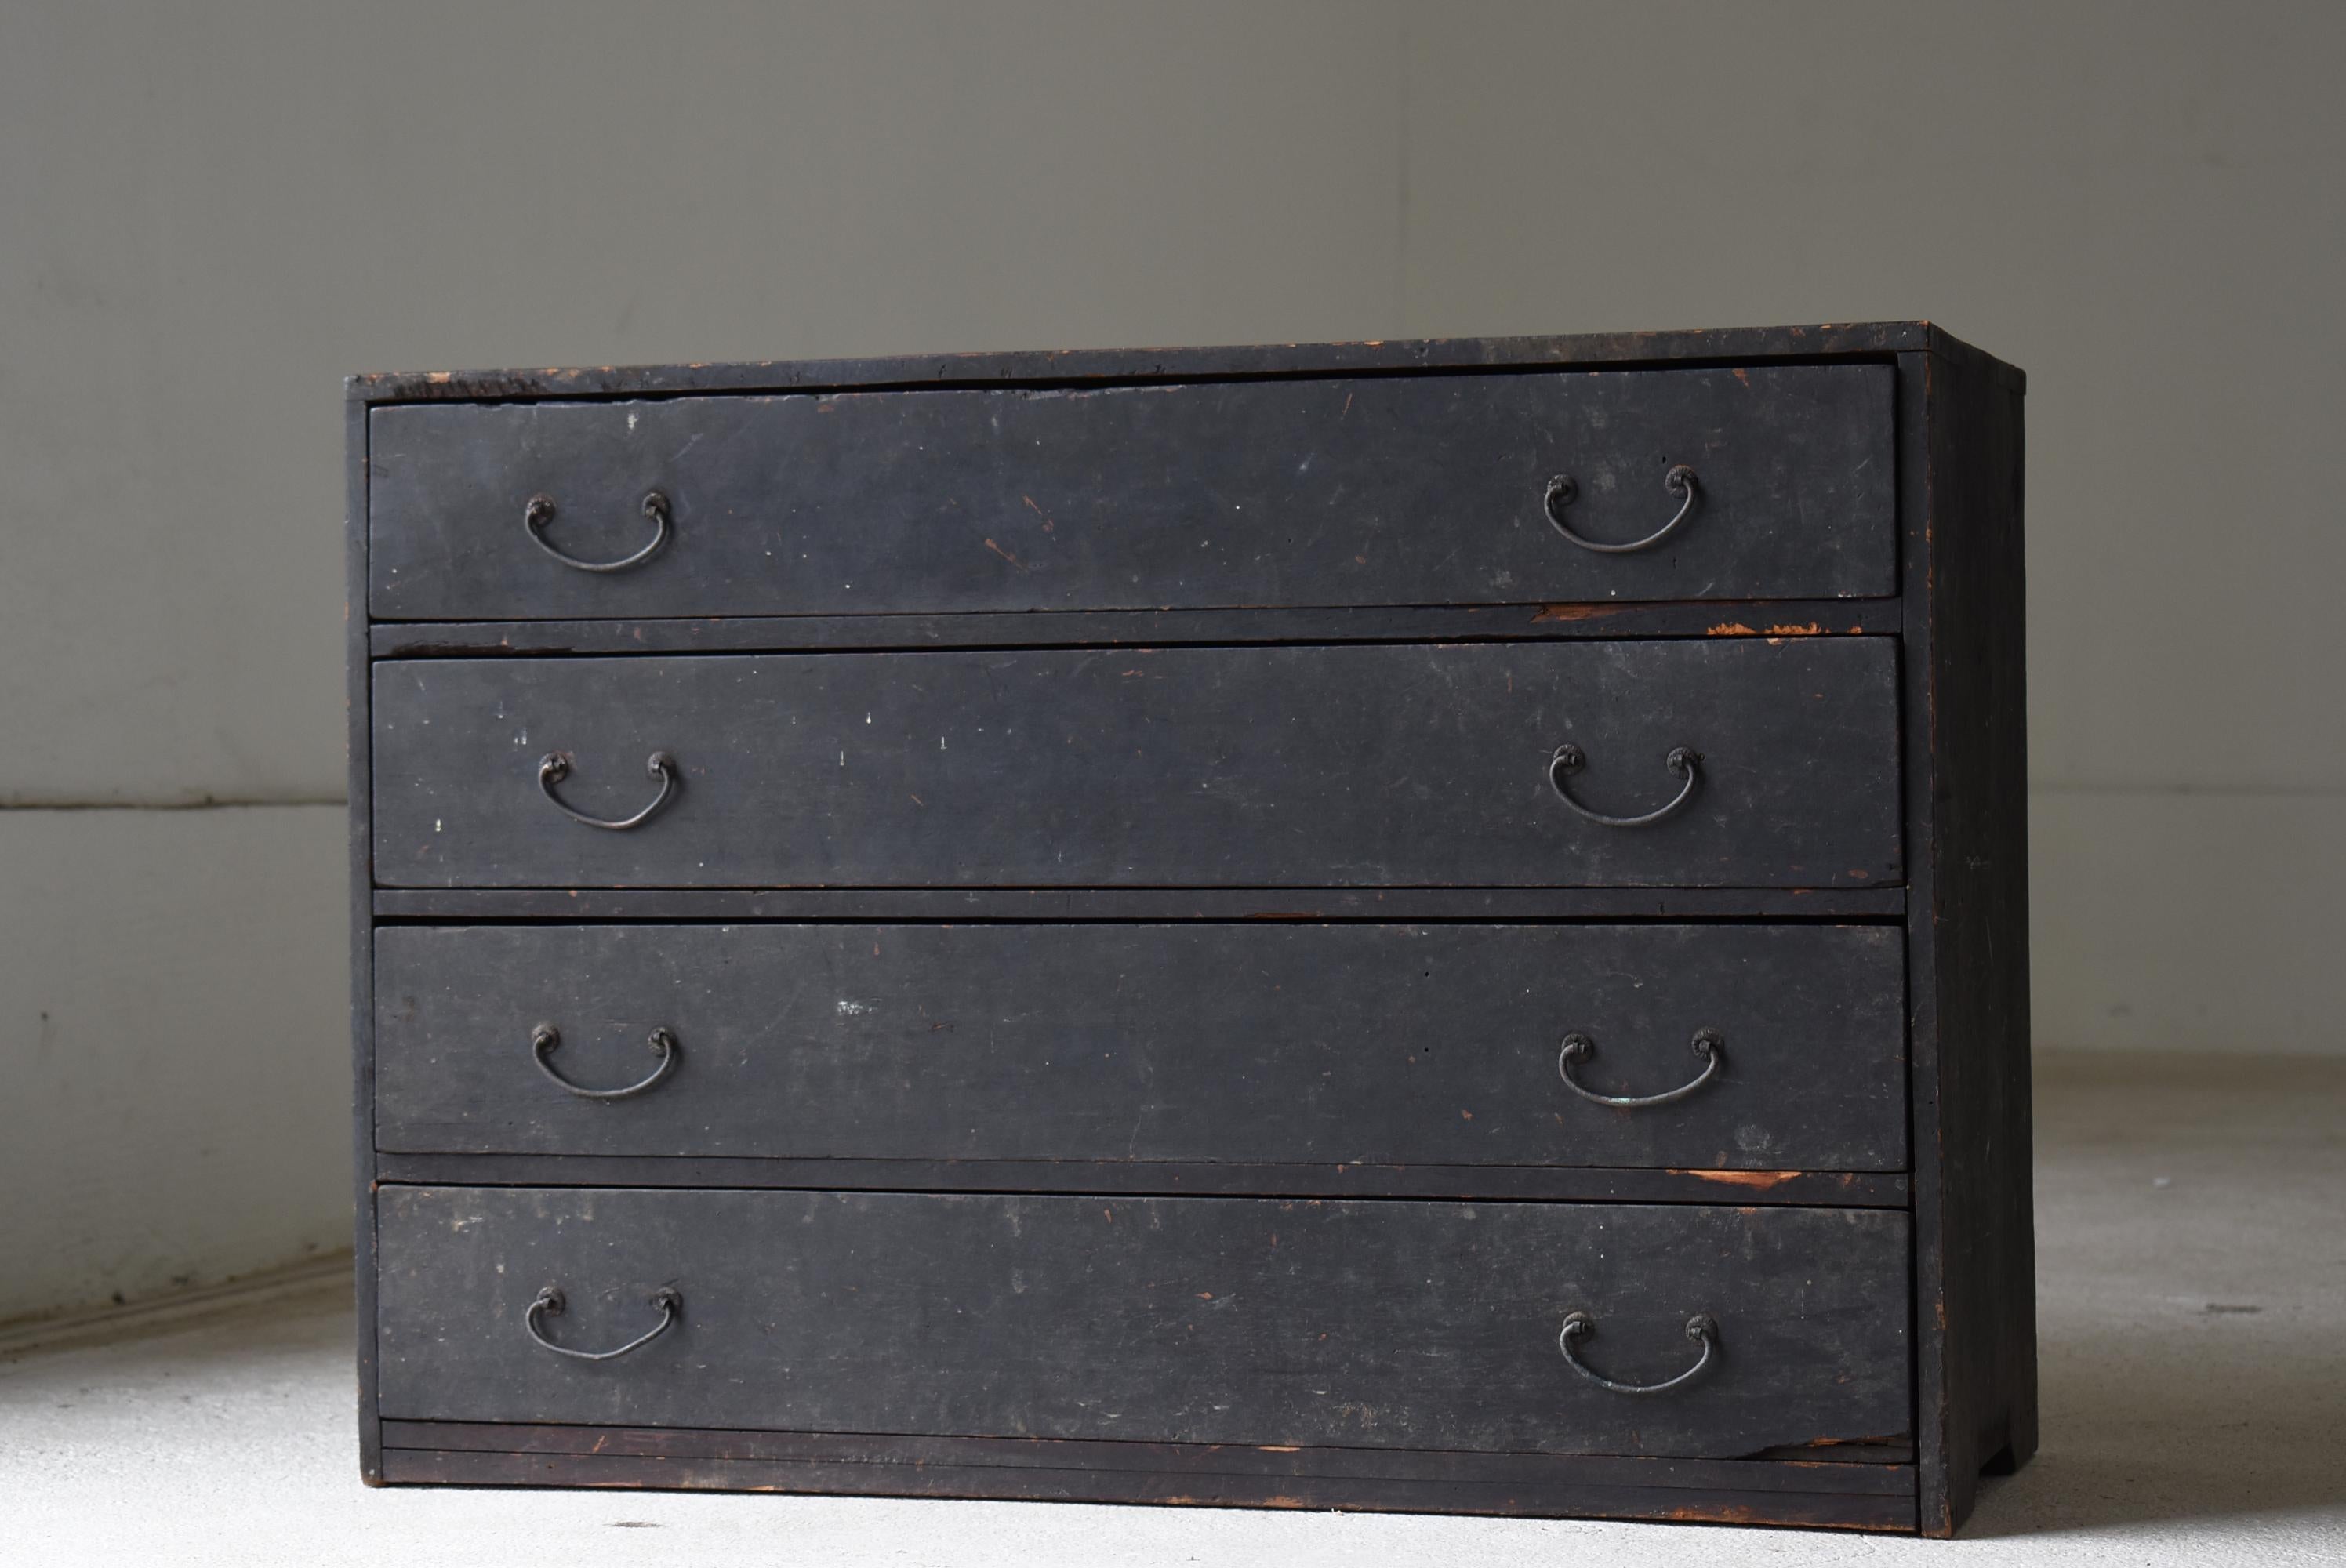 This is a very old Japanese drawer.
It is from the Edo period (1800s-1860s).
It is made of walnut wood.

It is a beautiful drawer.
The design is simple and lean.
It is the ultimate in simplicity.
The black color is good and has a wonderful